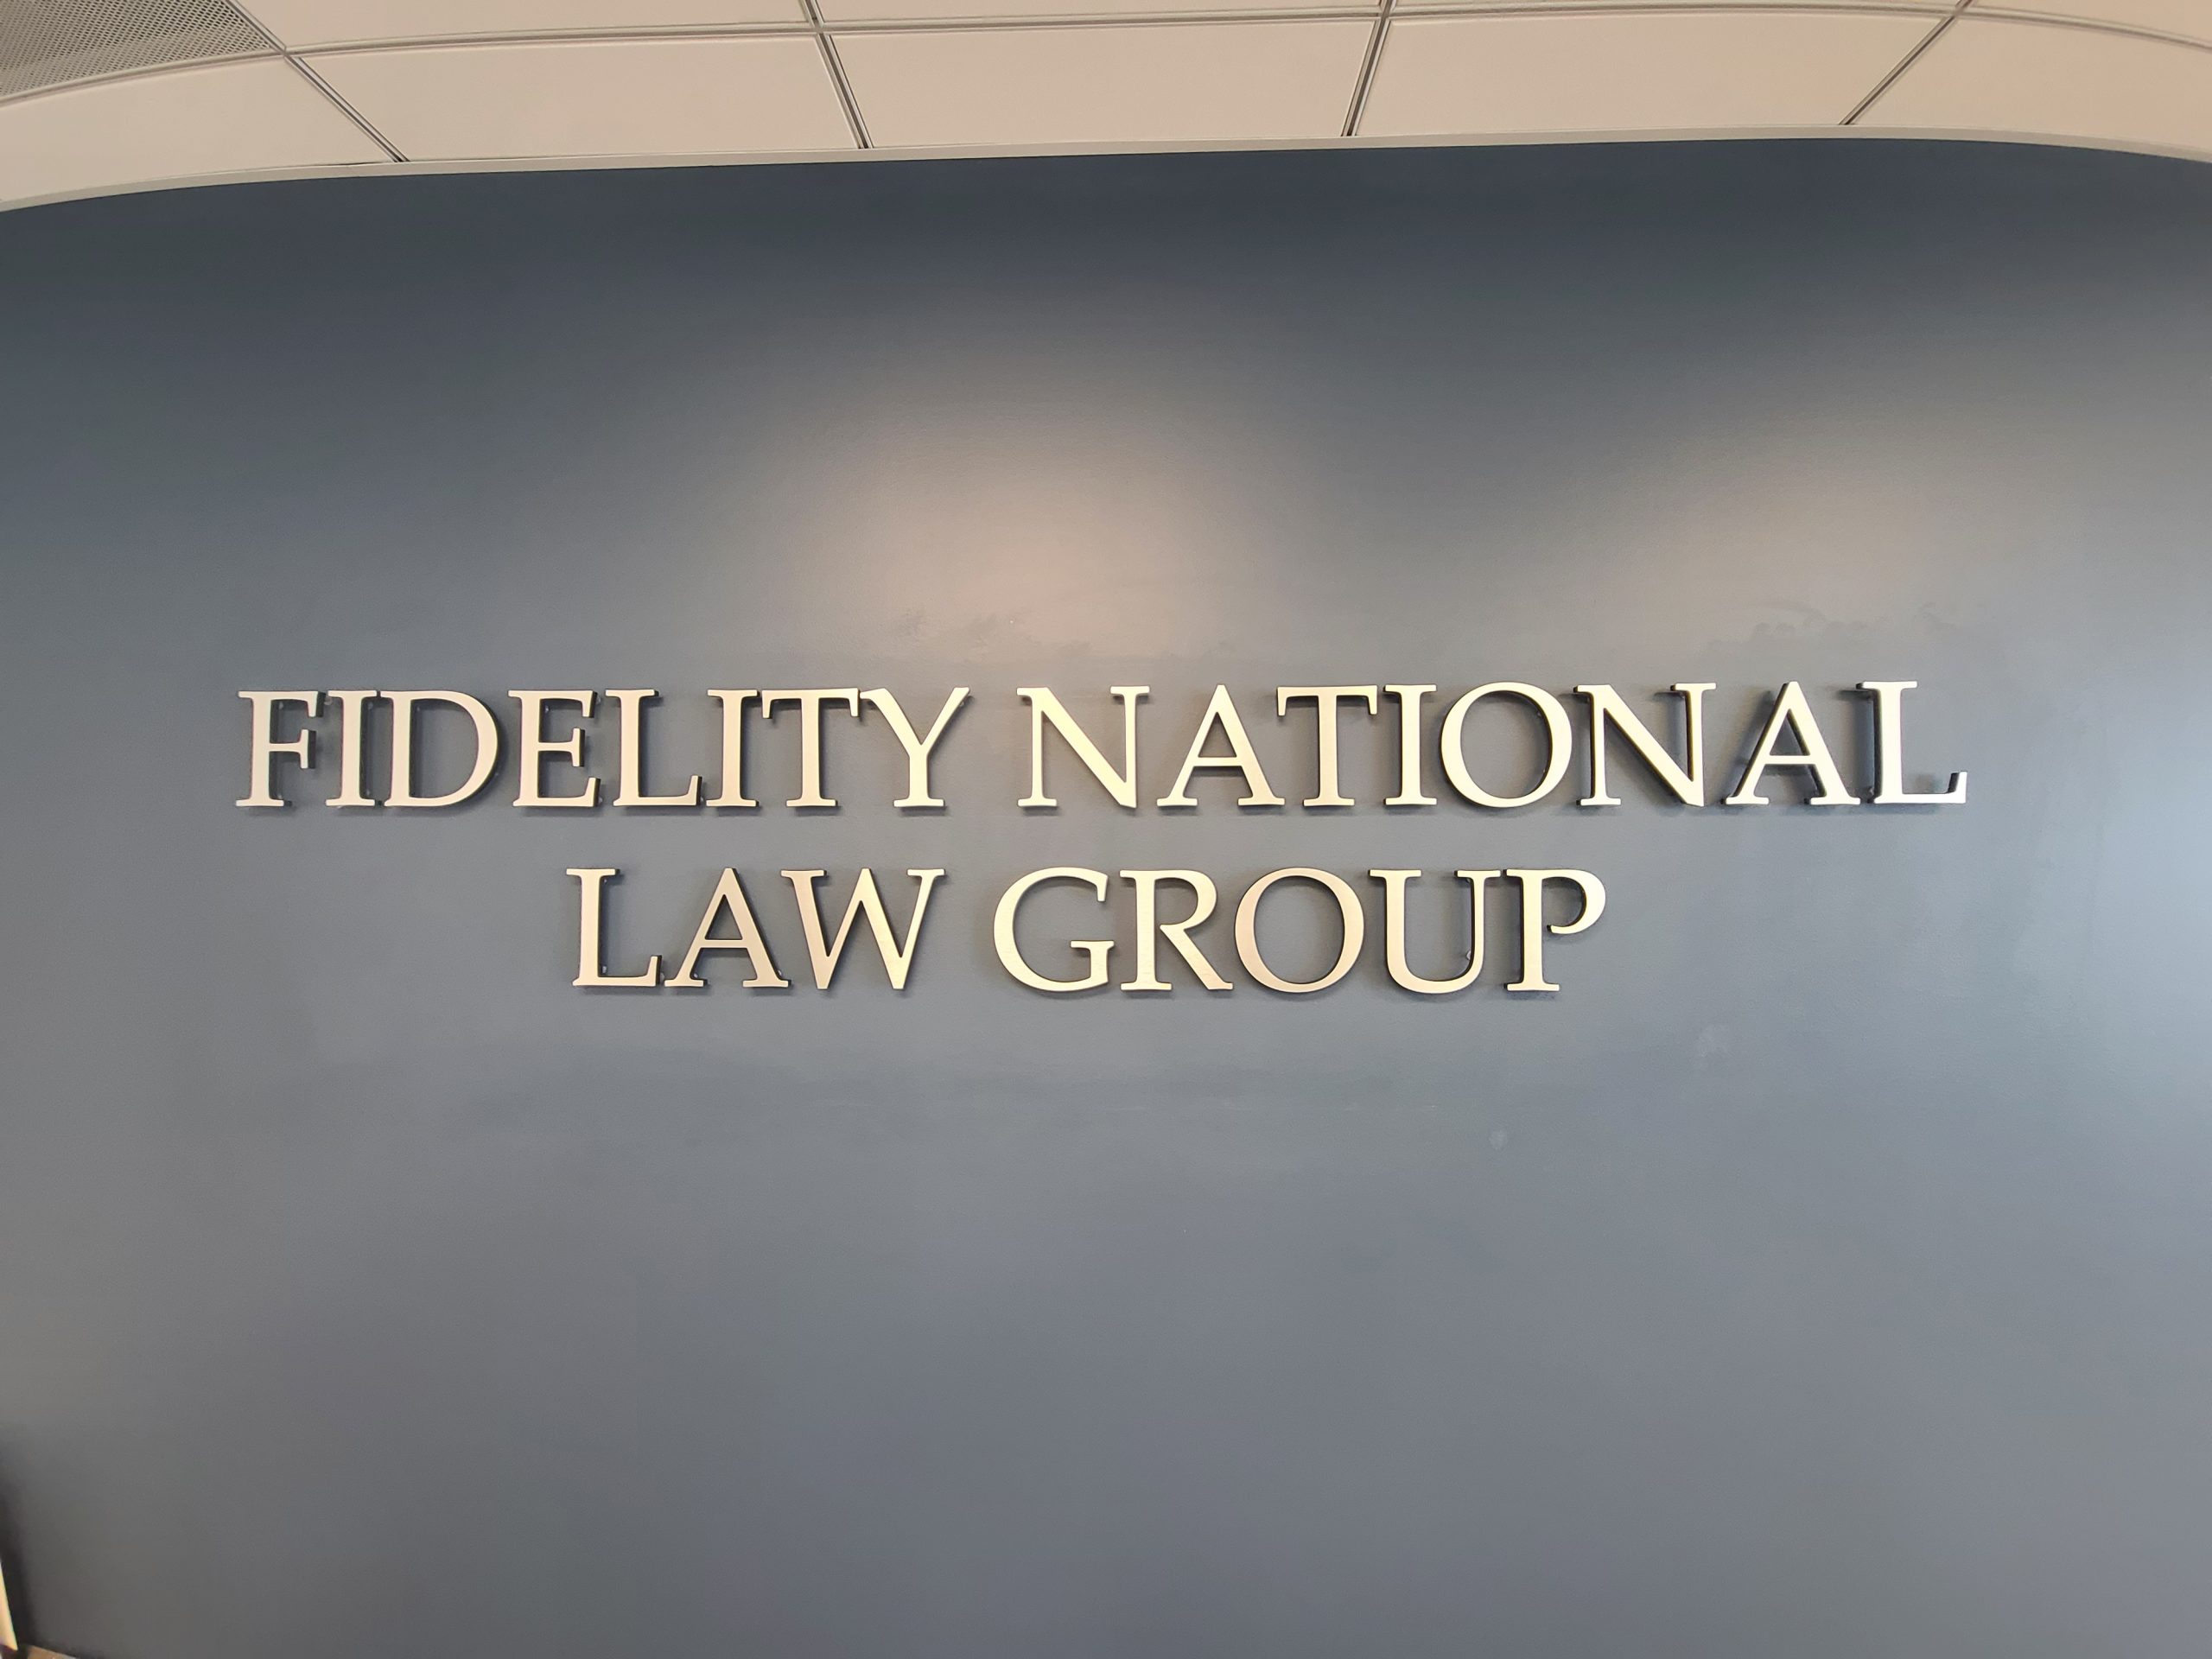 Prestigious firms need signage that reflect the caliber of their legal services. Such as this office lobby sign for Fidelity National Law Group in Los Angeles.